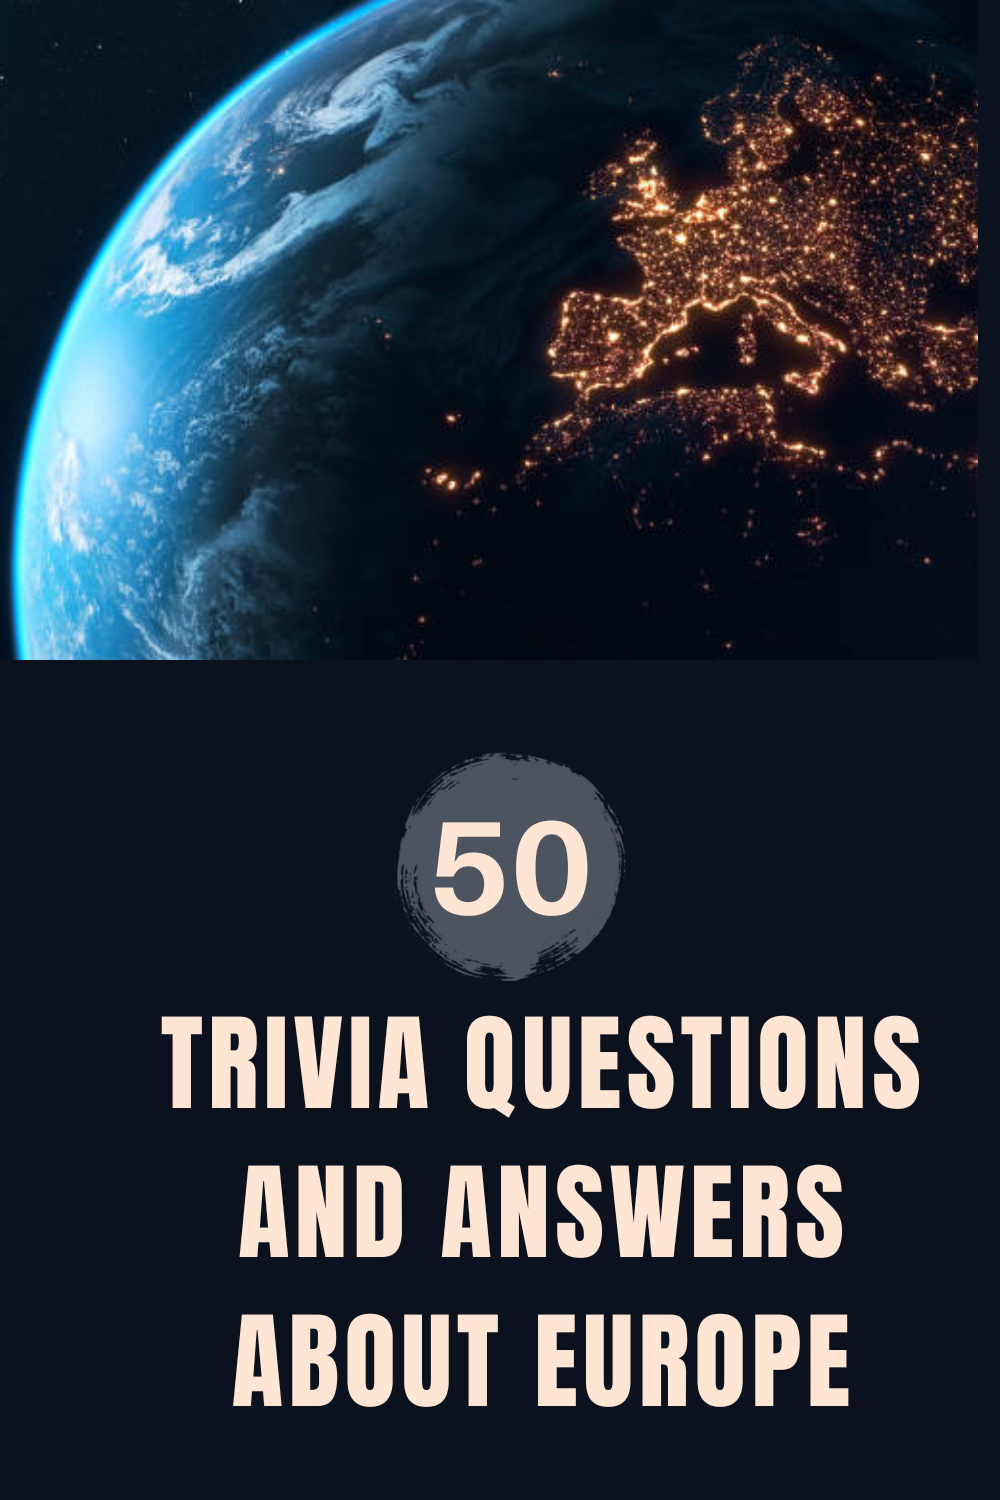 Trivia Questions and Answers about Europe